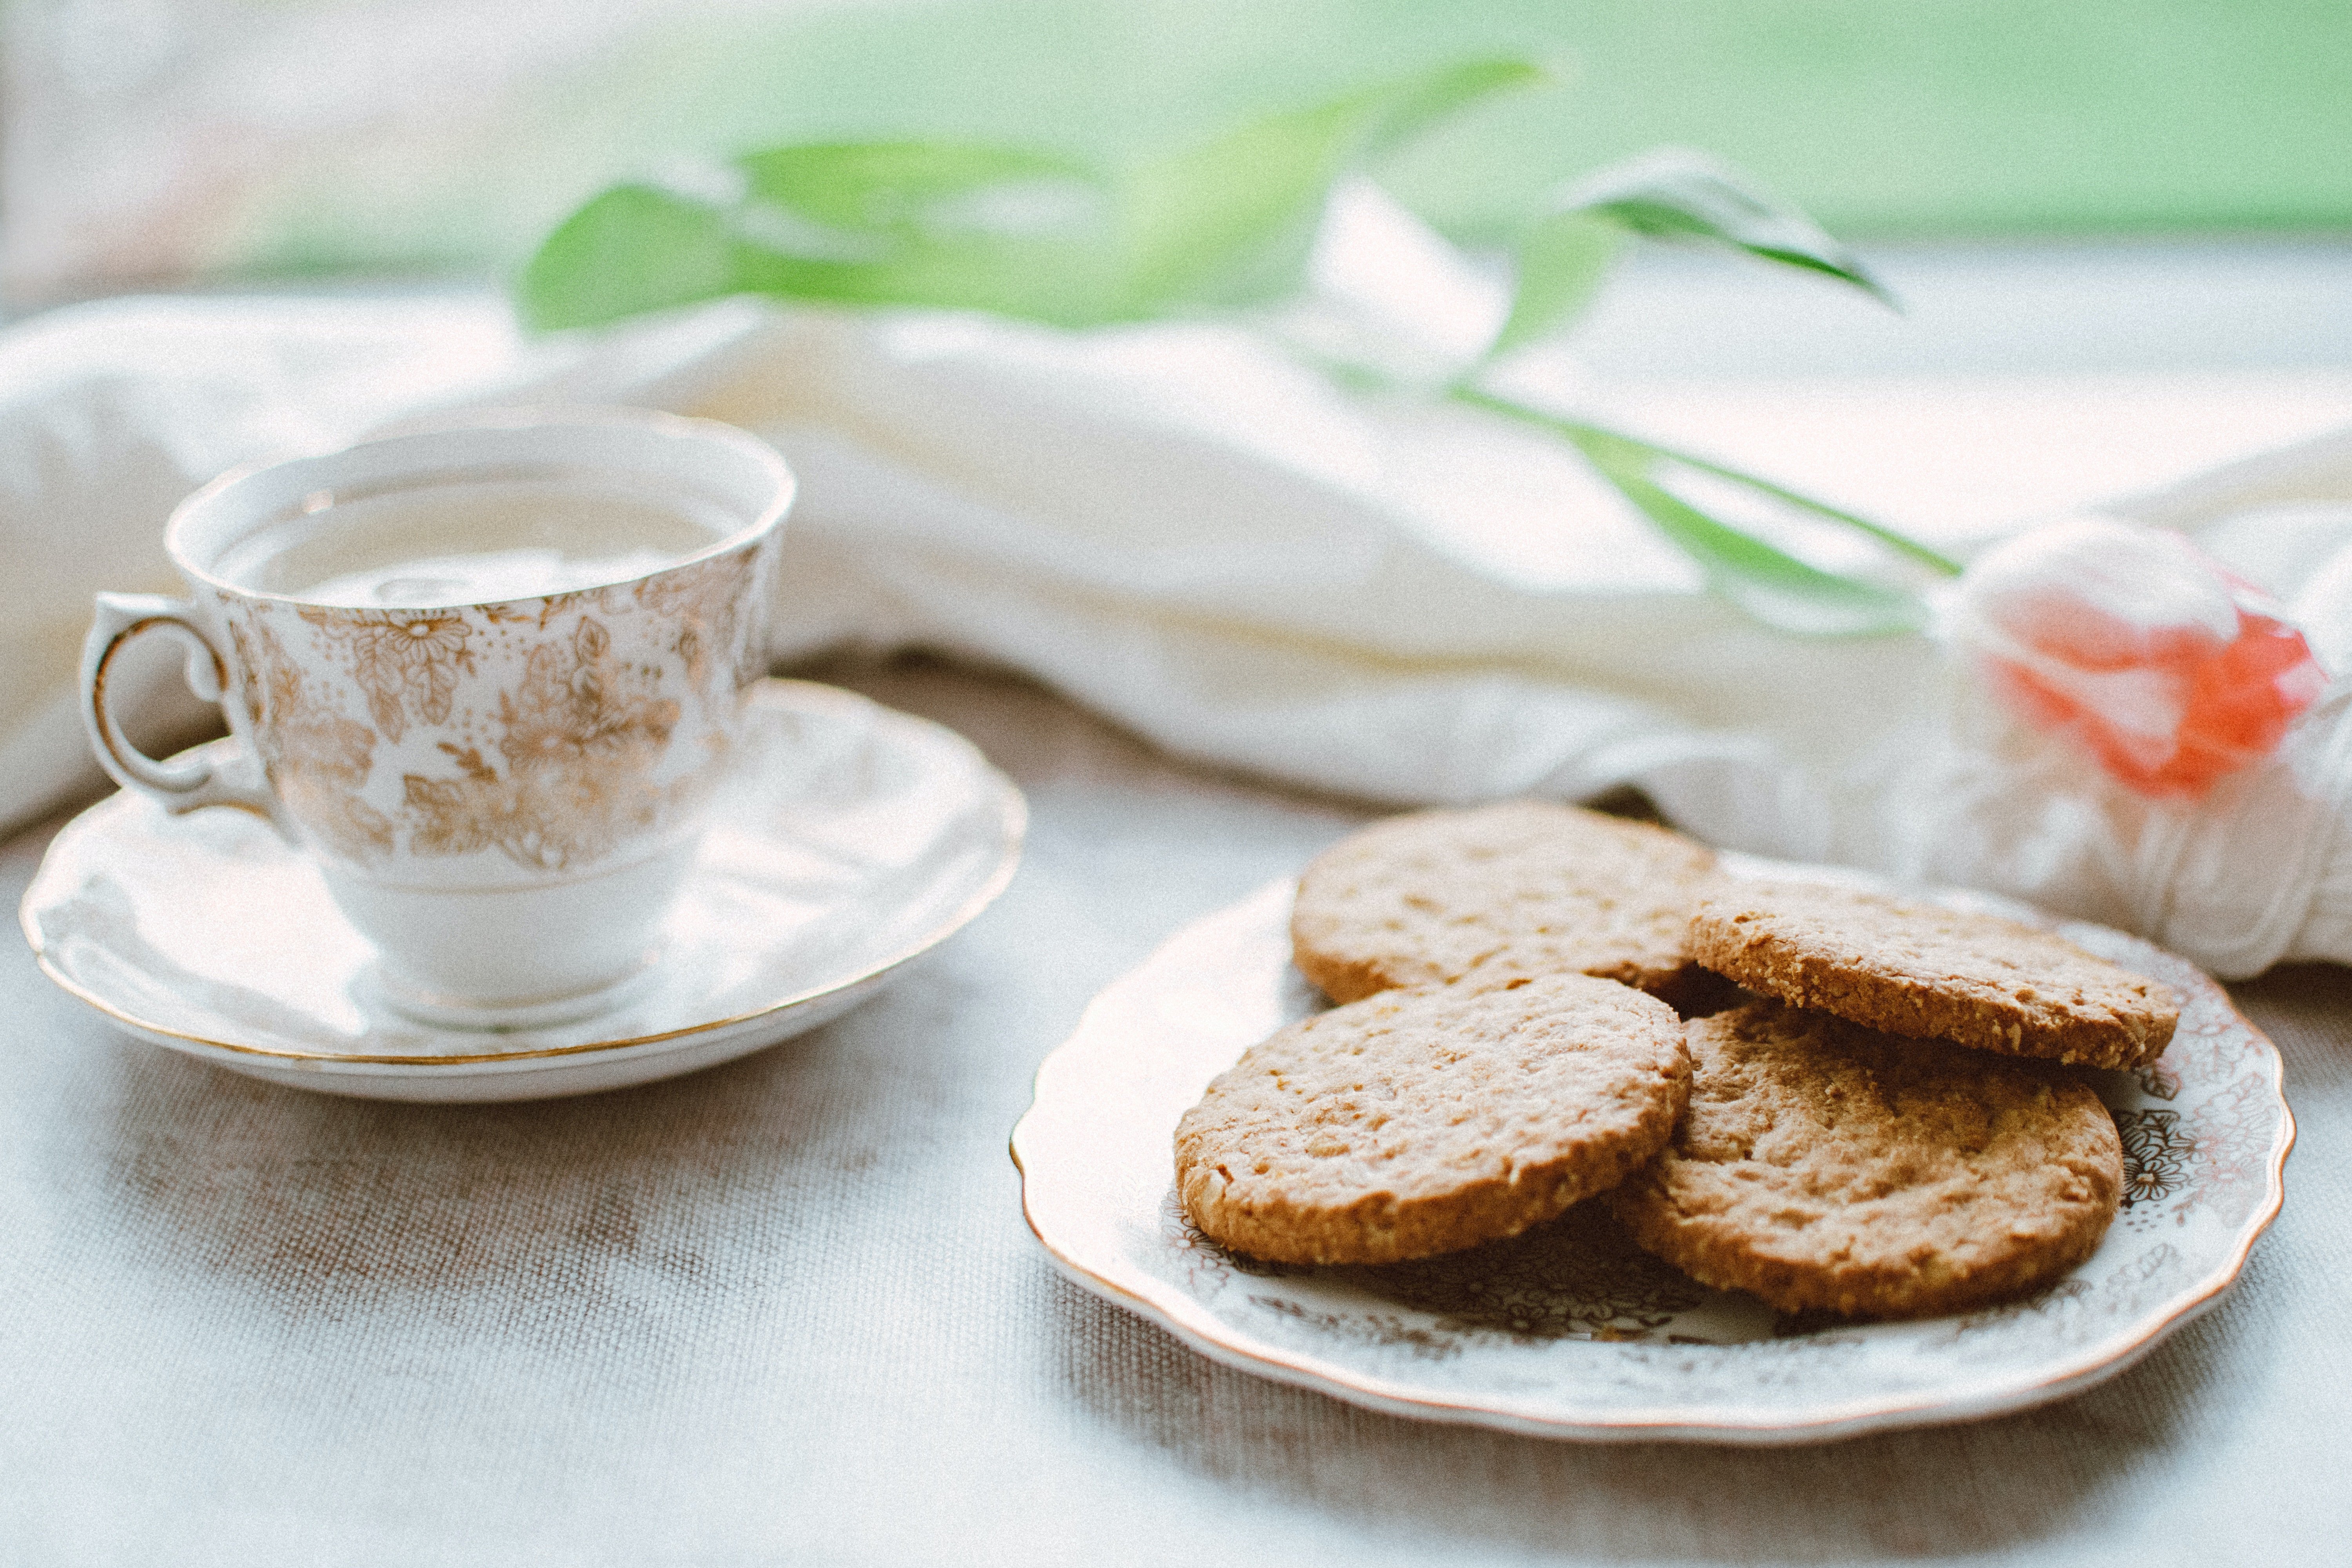 Joan offered tea and cookies to Peter | Photo: Pexels